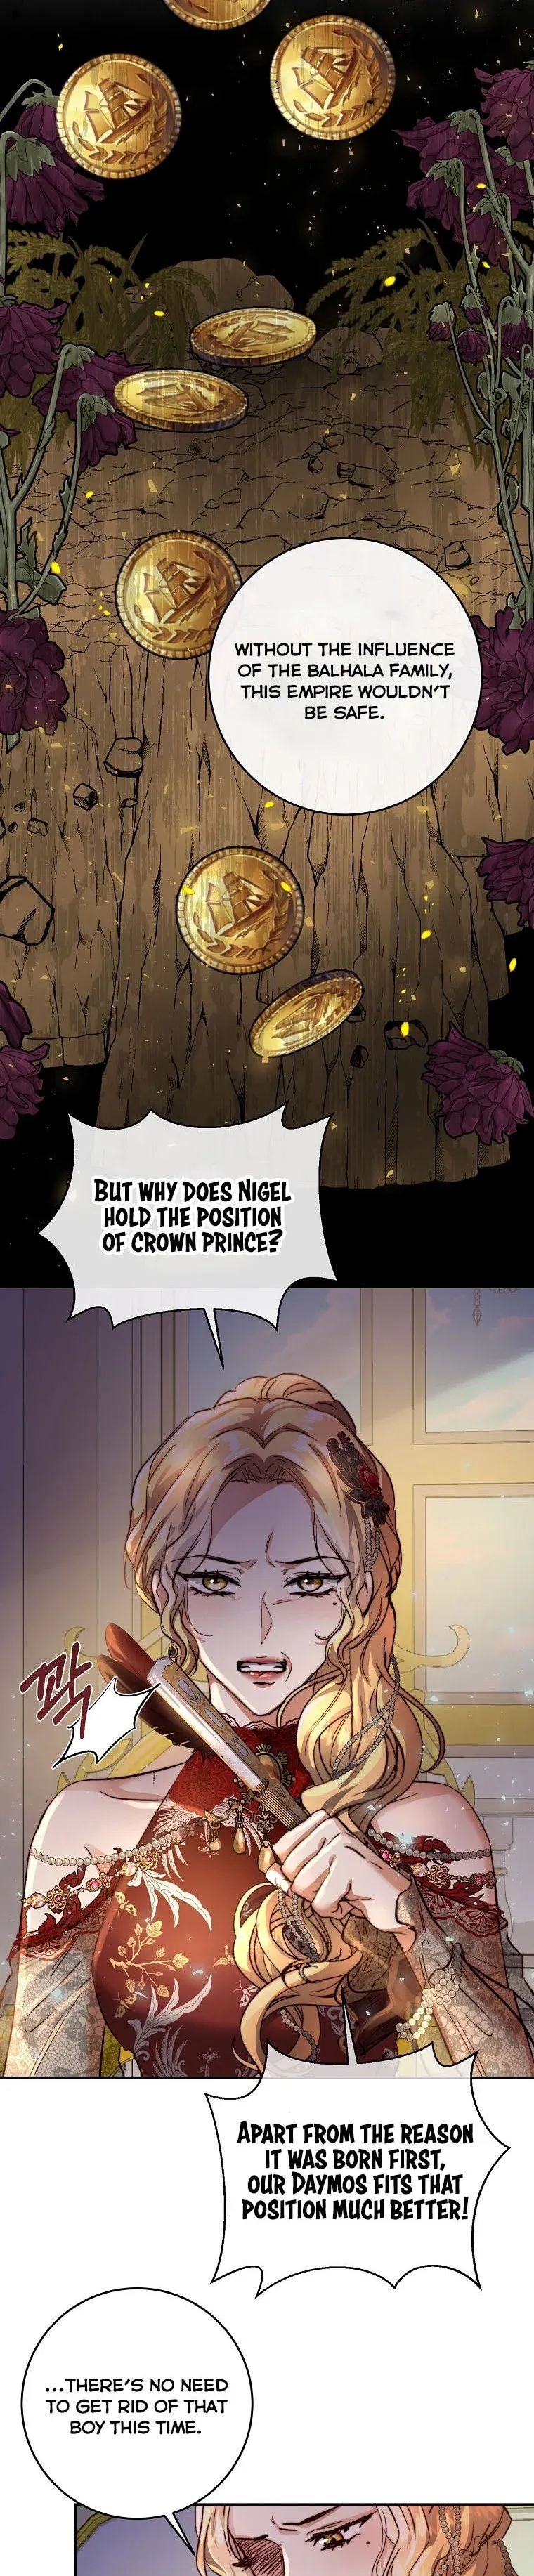 The Princess Blooms as a Crazy Flower Chapter 17 page 18